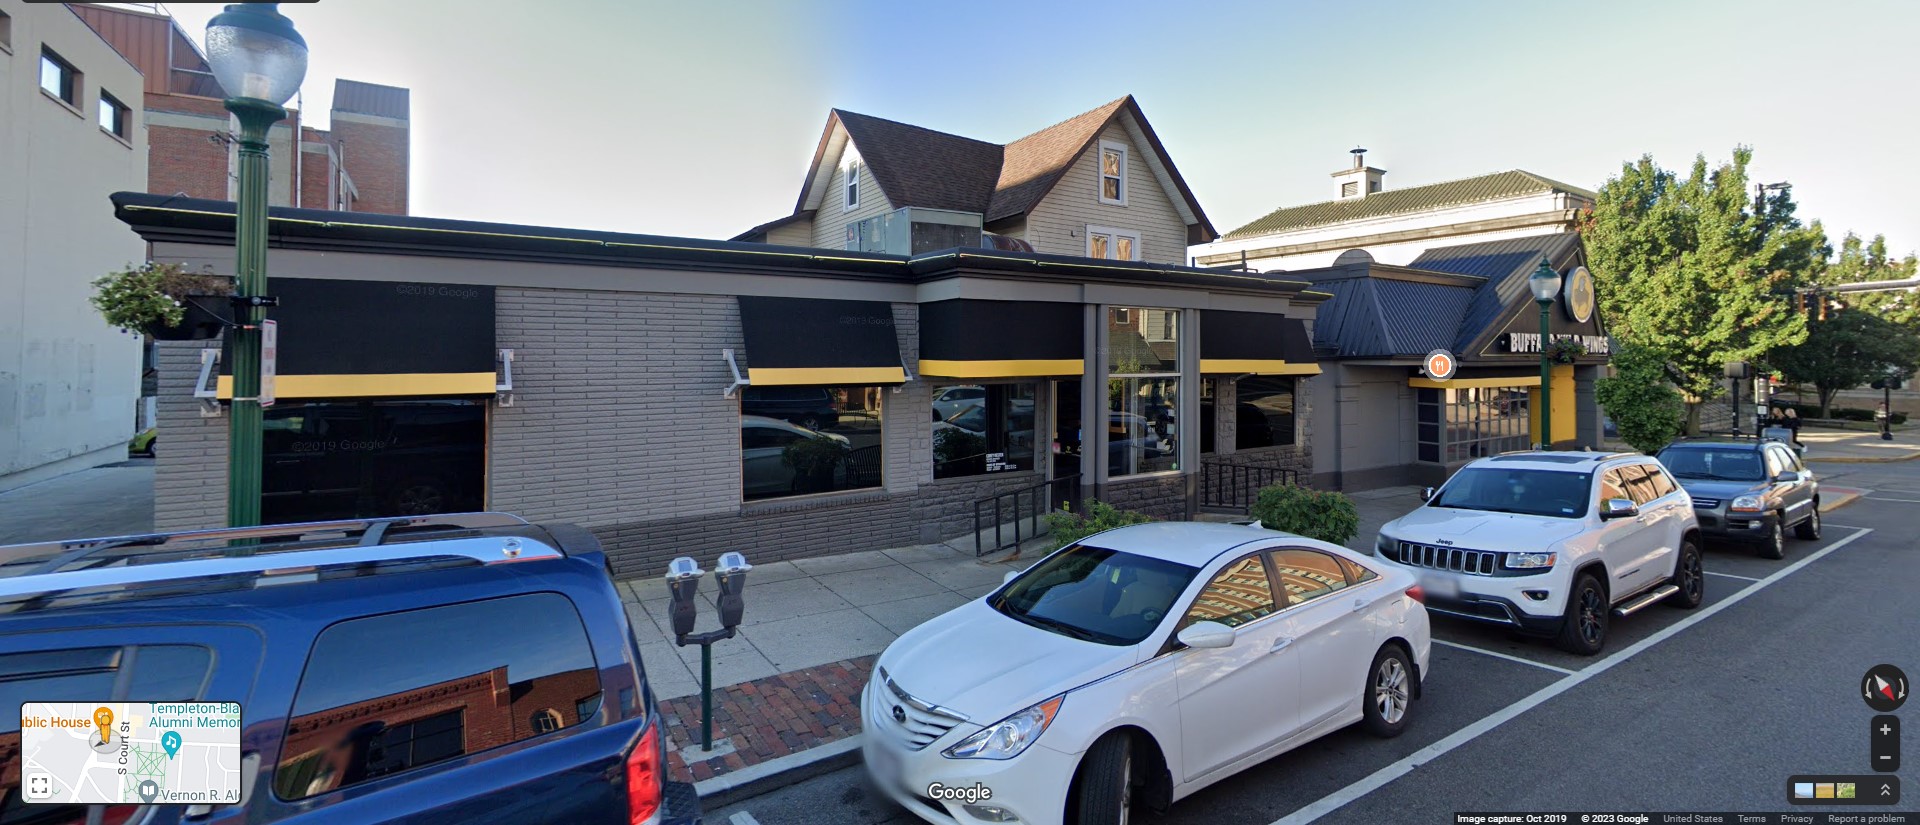 Google Street View image of Buffalo Wild Wings restaurant on street with cars parked